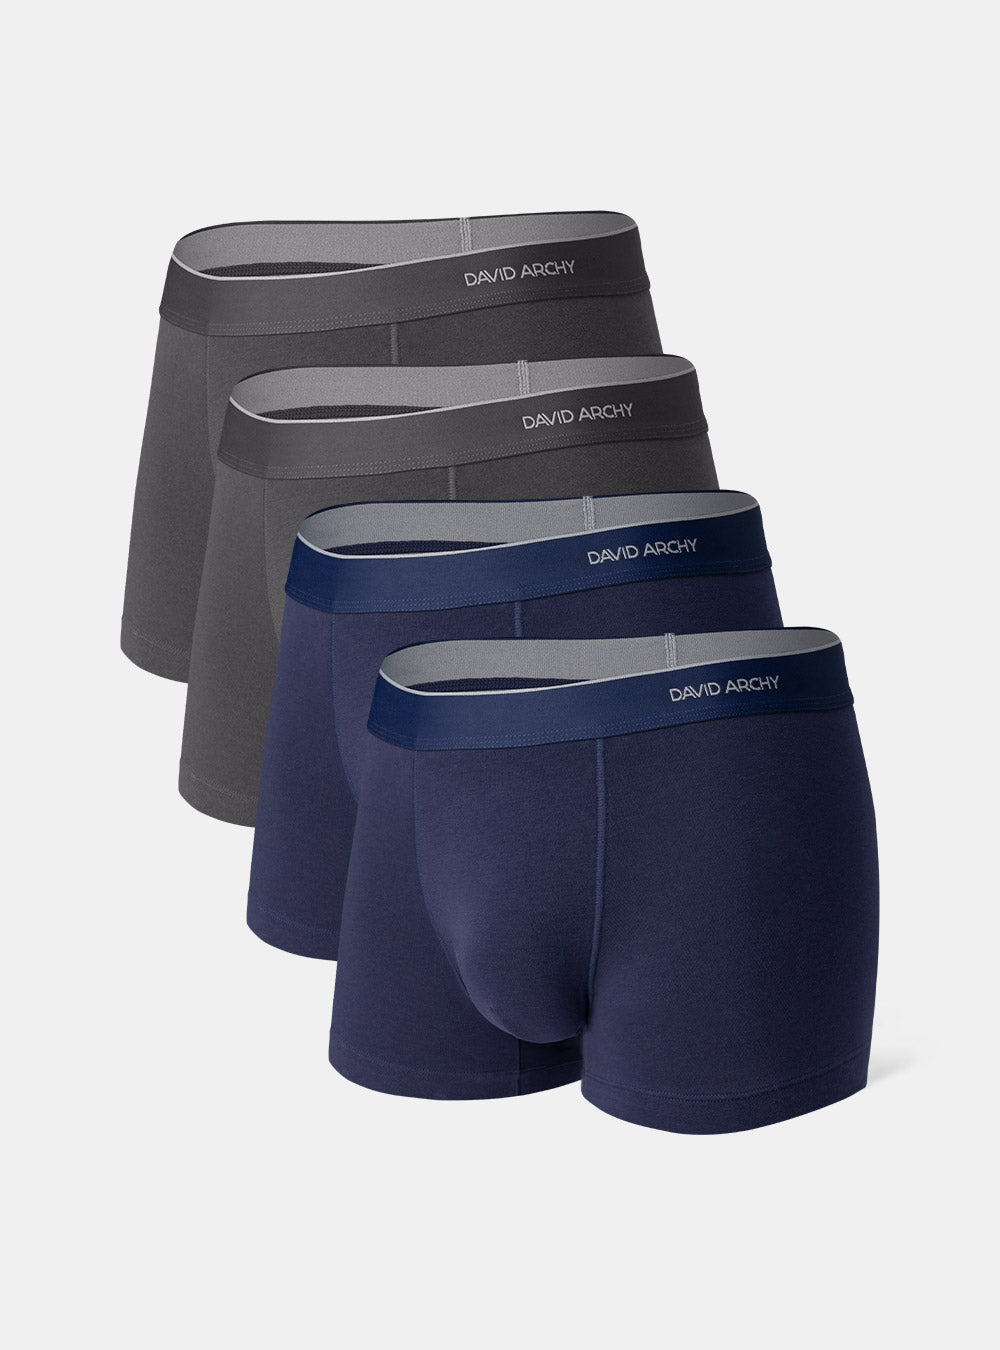 4 Packs Cotton Trunks with Pouch David Archy Soft Breathable